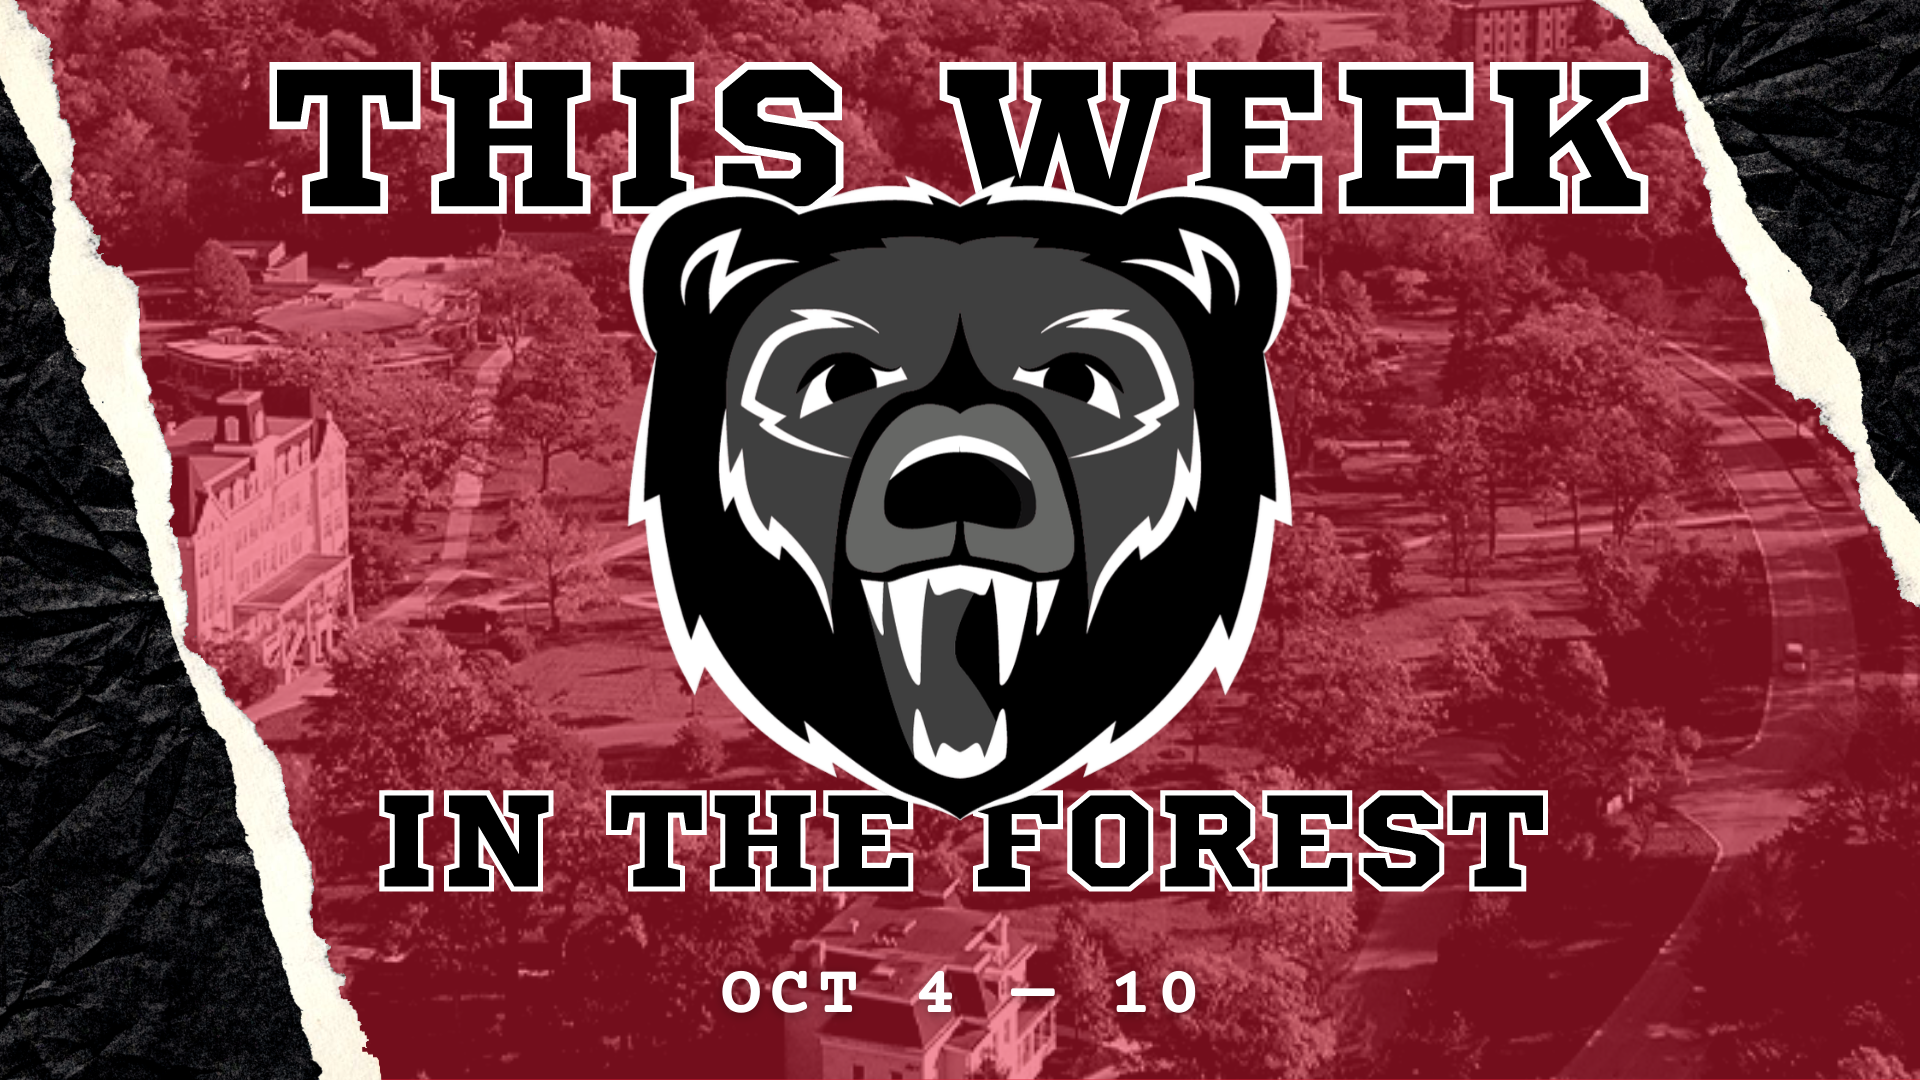 This Week in the Forest: Oct. 4-10